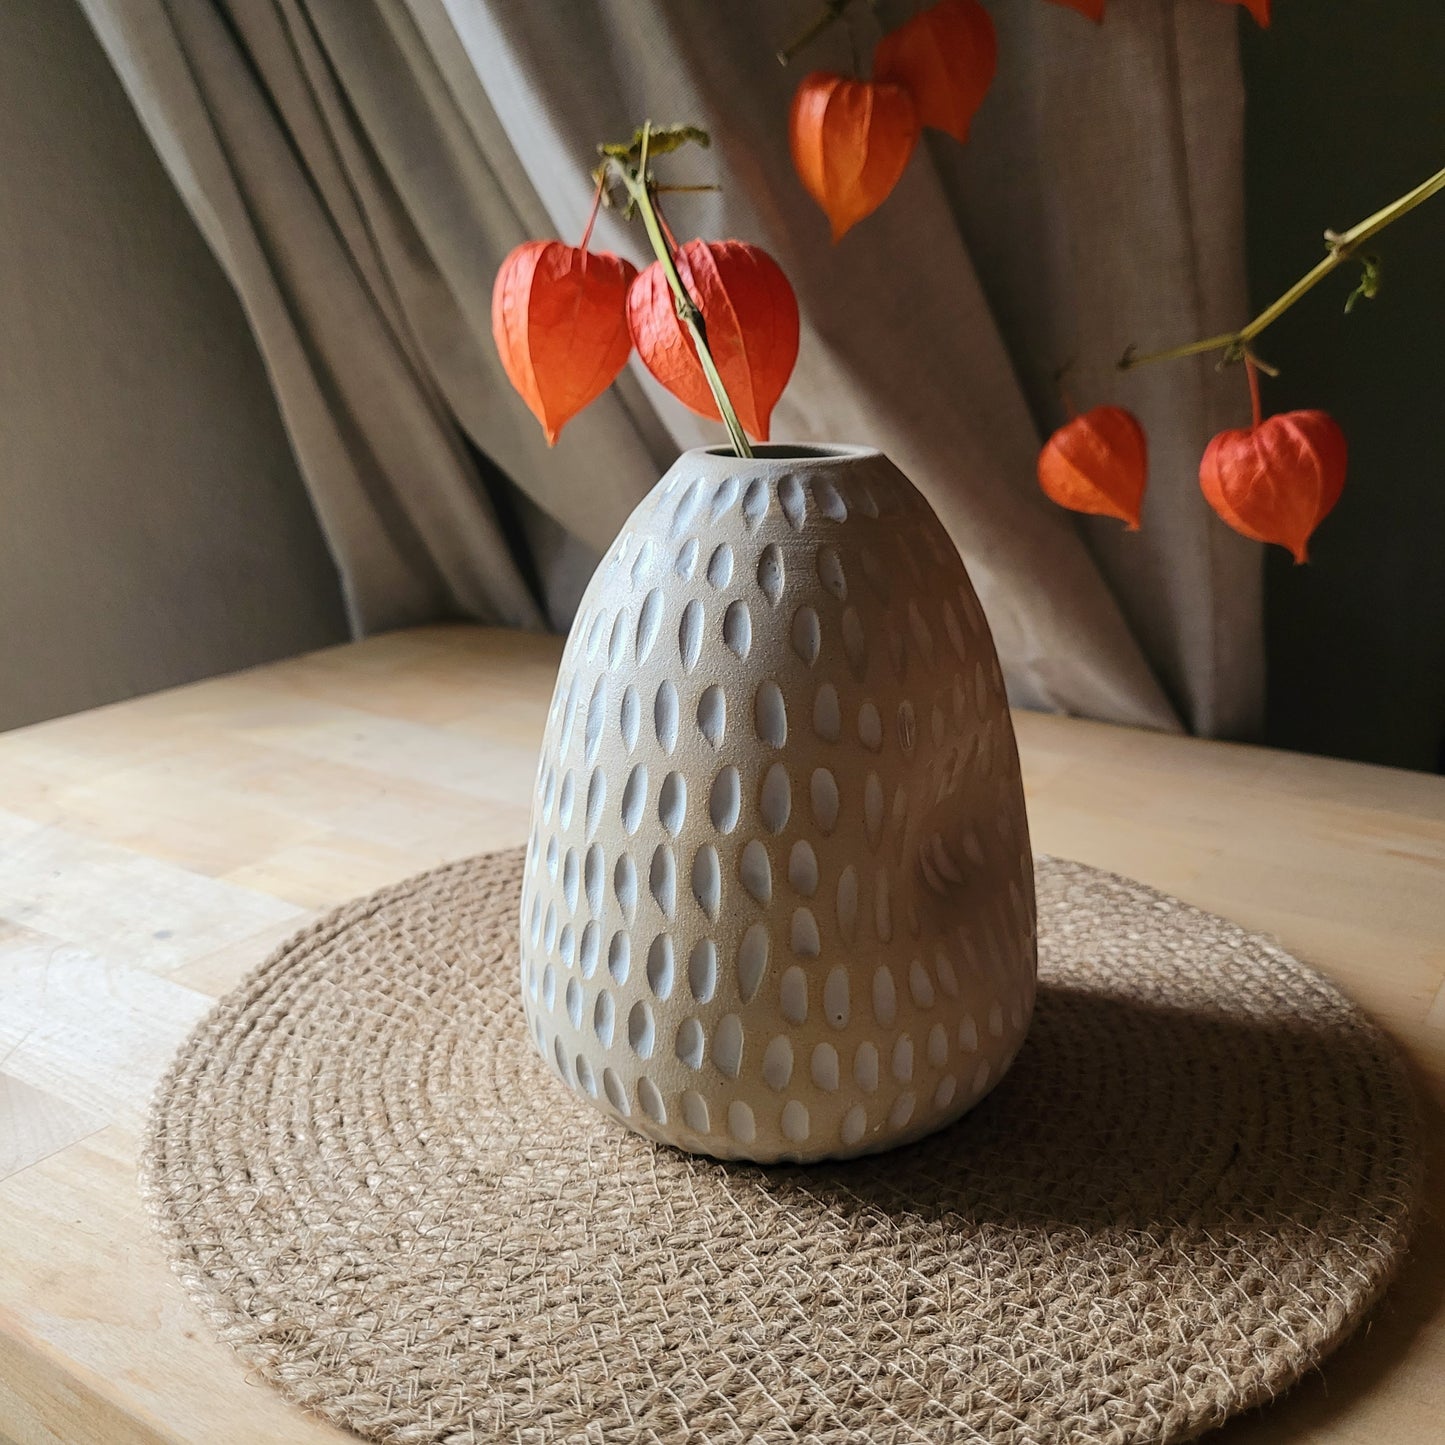 Cozy ceramic bud vase - this luxe cream-white number comes with a milk-white and textured design for added flair!